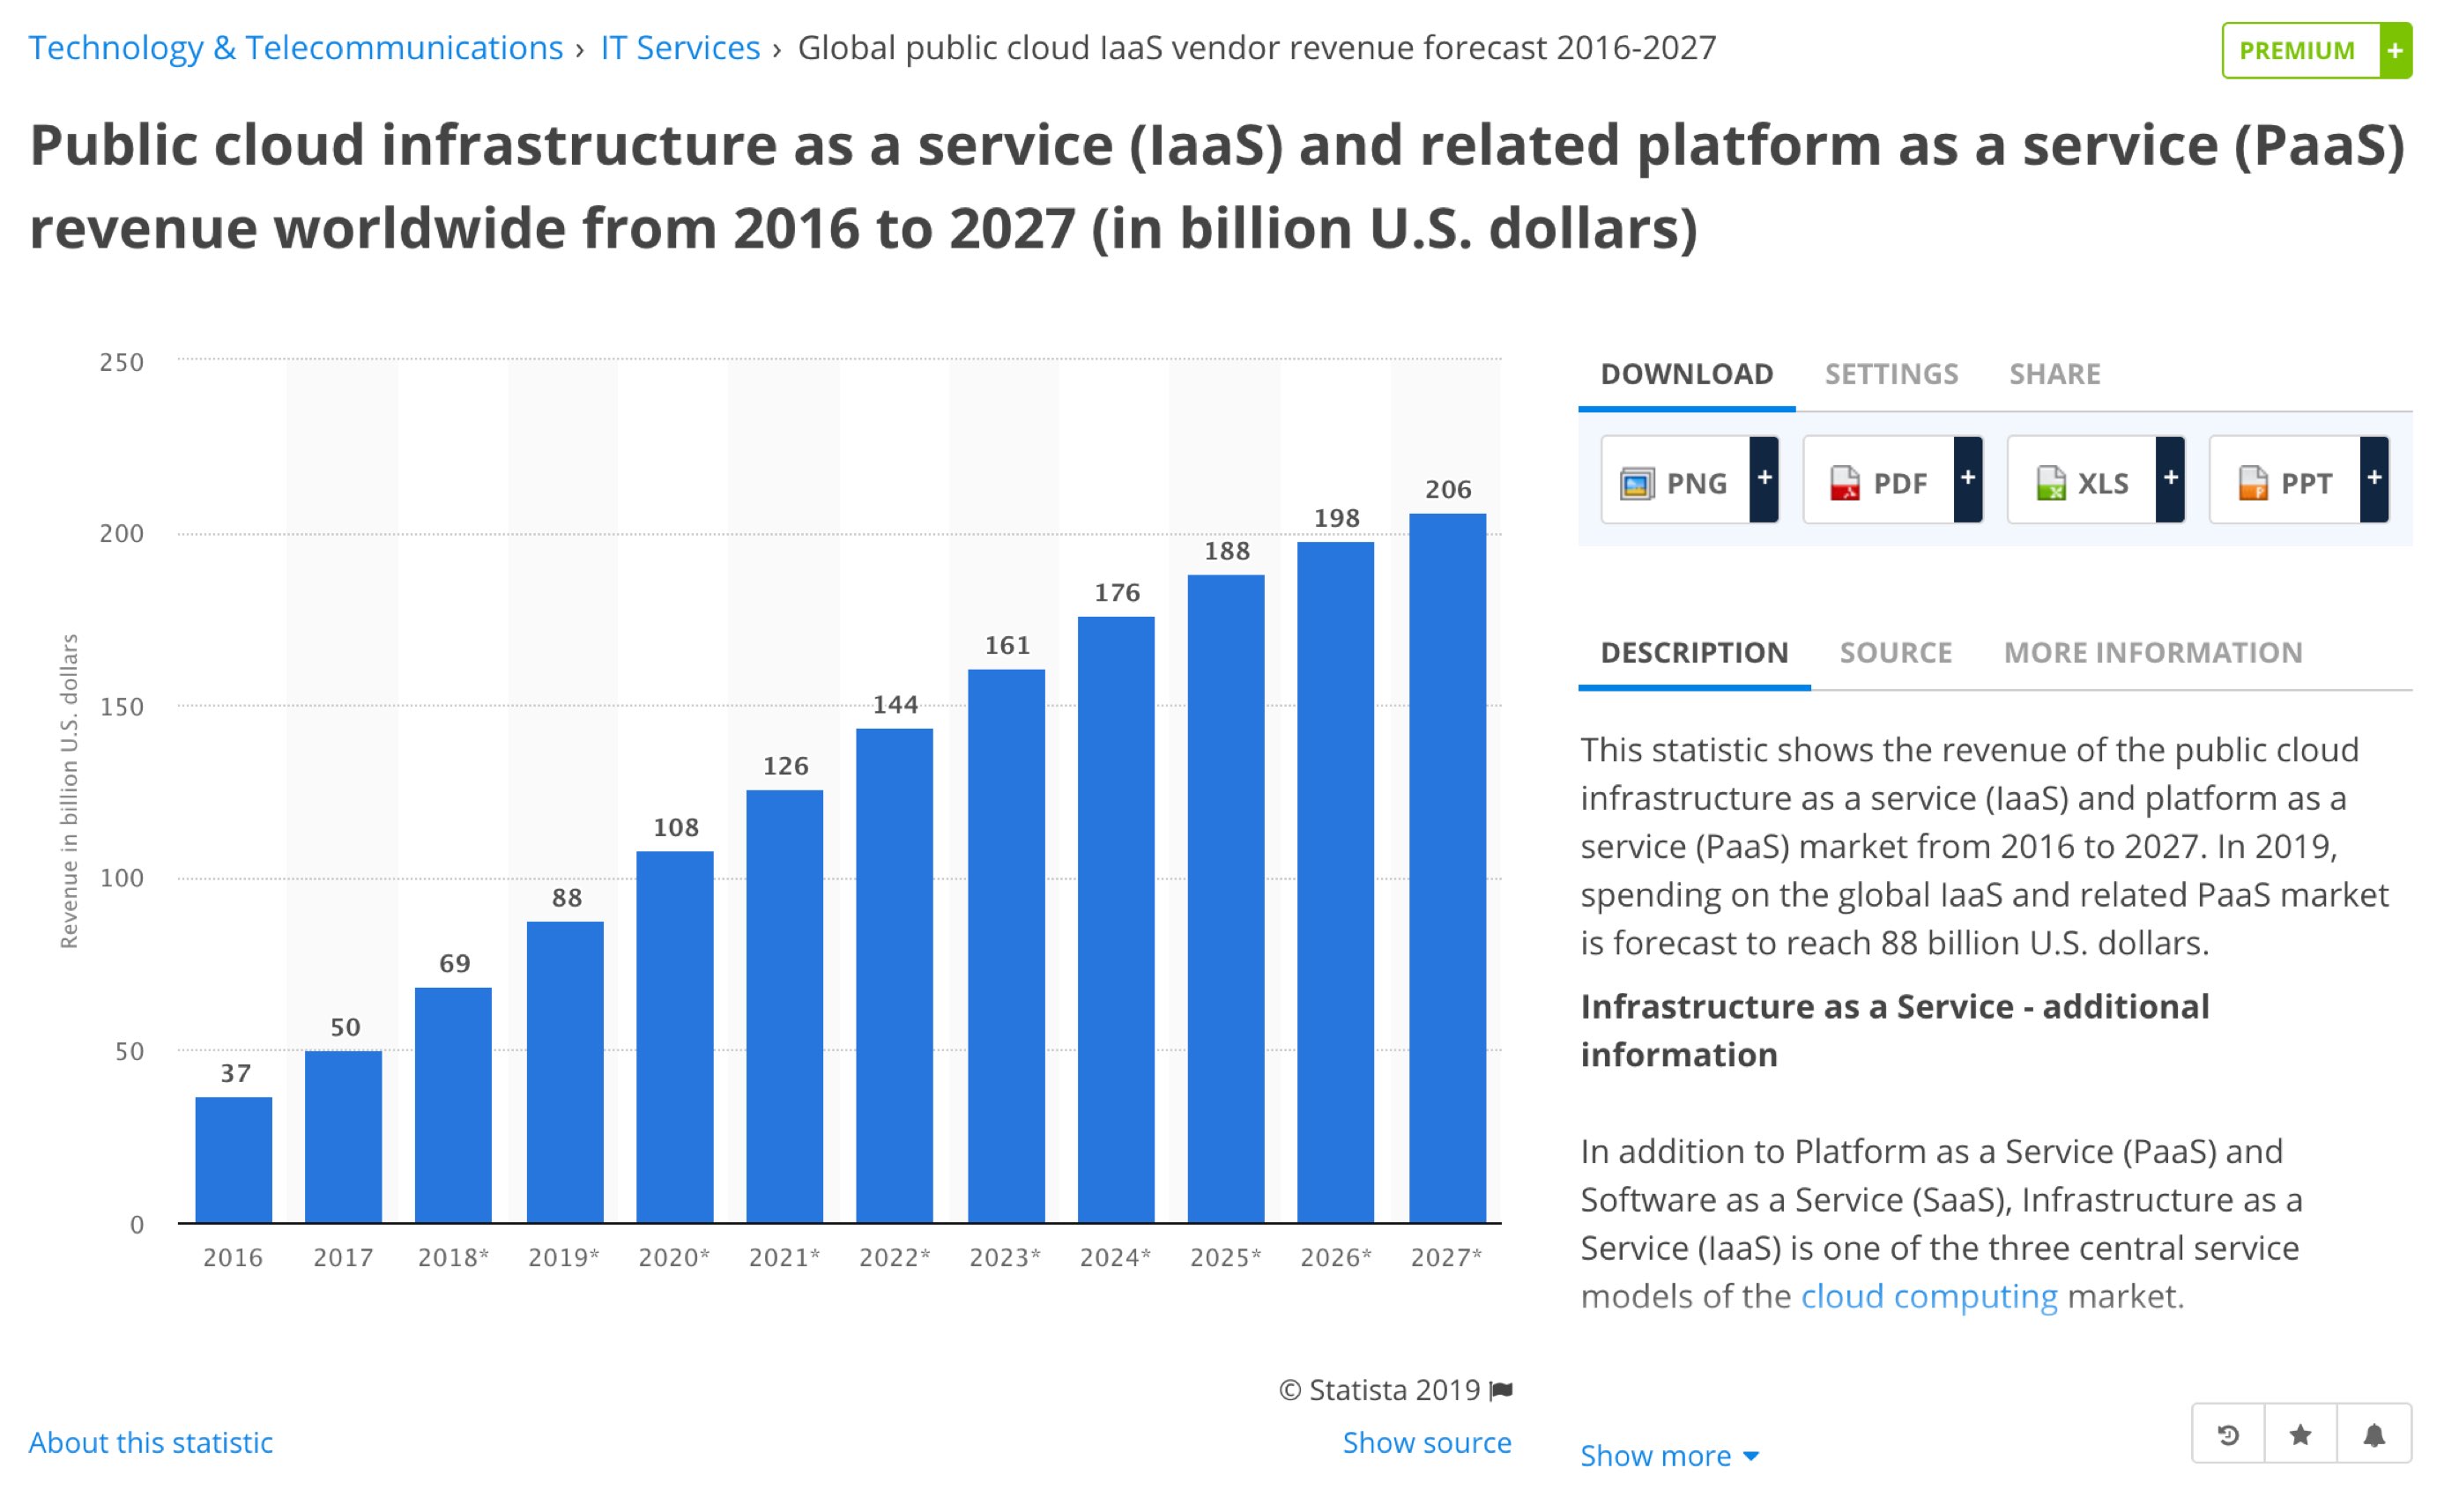 Public cloud infrastructure as a service (IaaS) and related platform as a service (PaaS) revenue worldwide from 2016 to 2027 (in billion U.S. dollars)